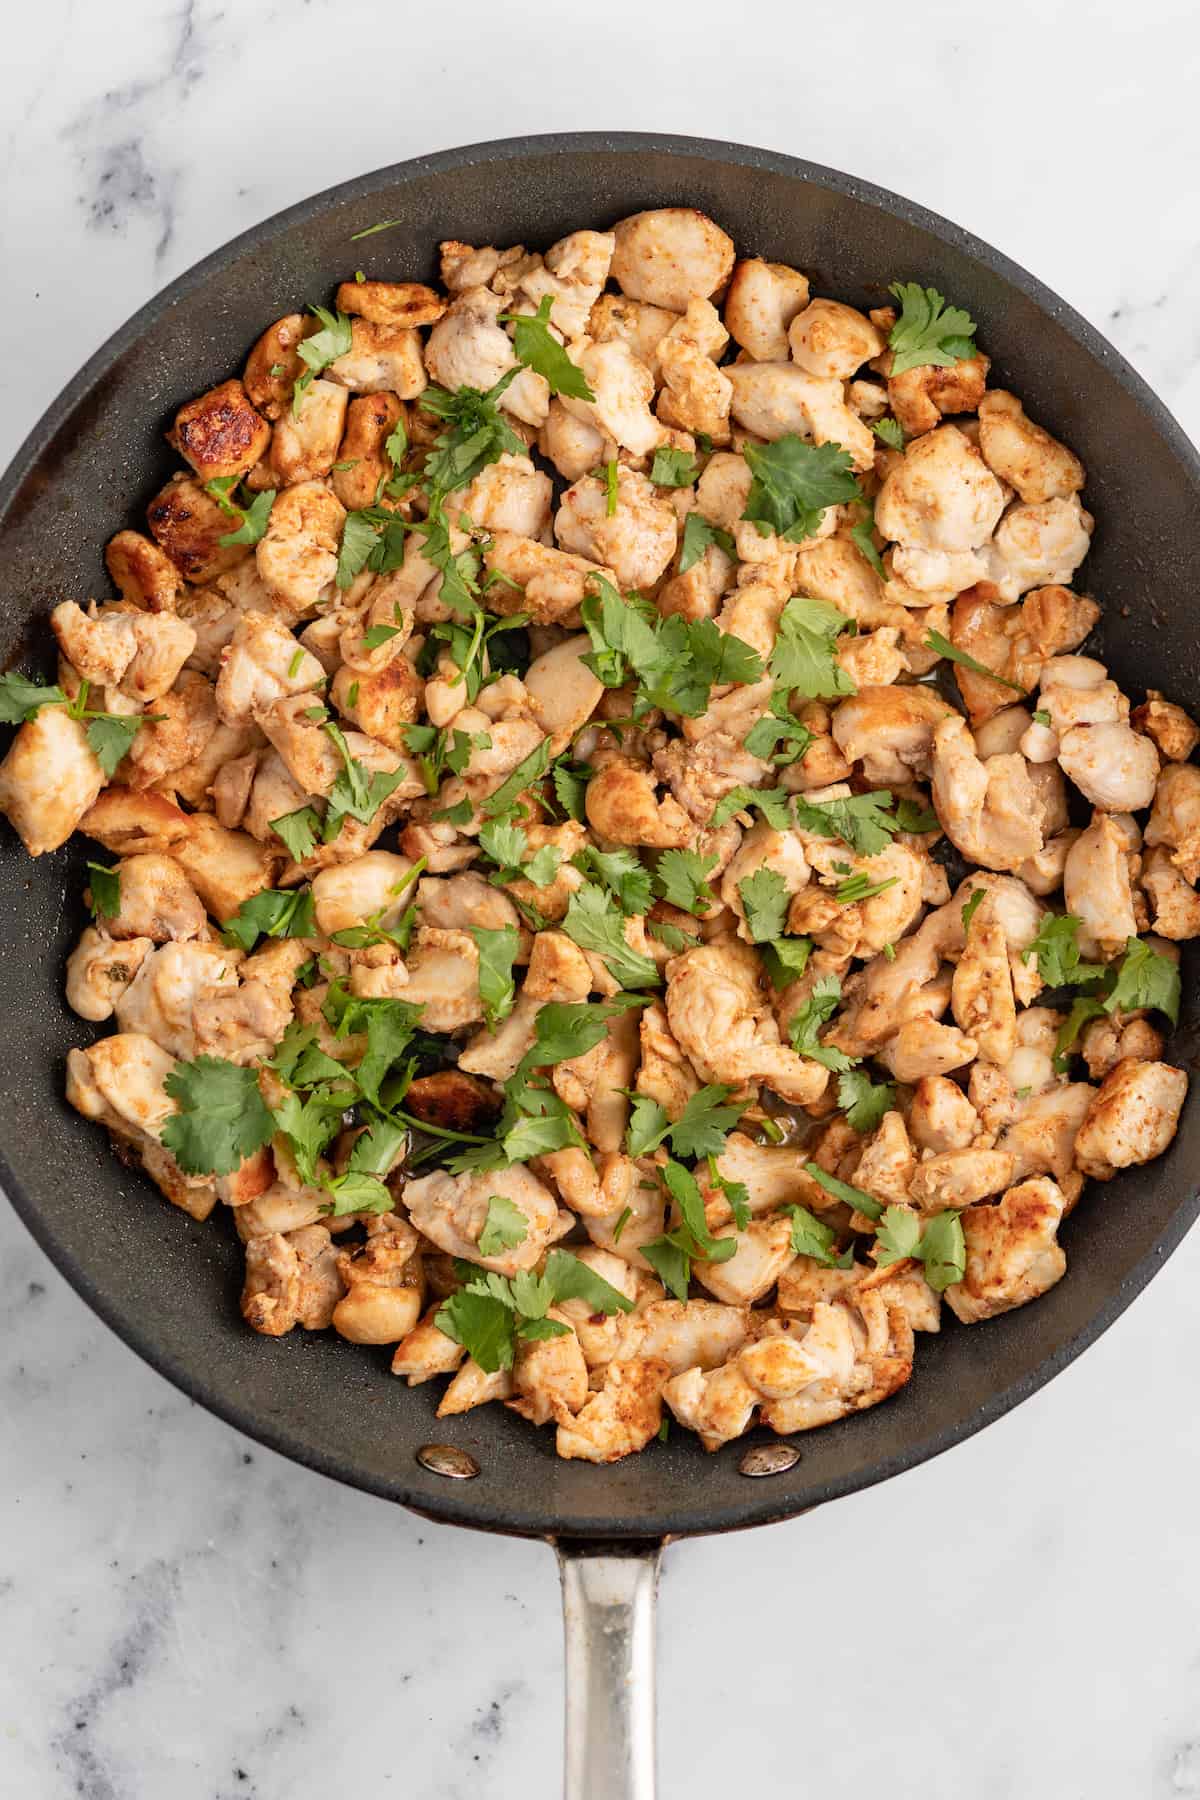 cooked seasoned chicken in a pan garnished with fresh herbs